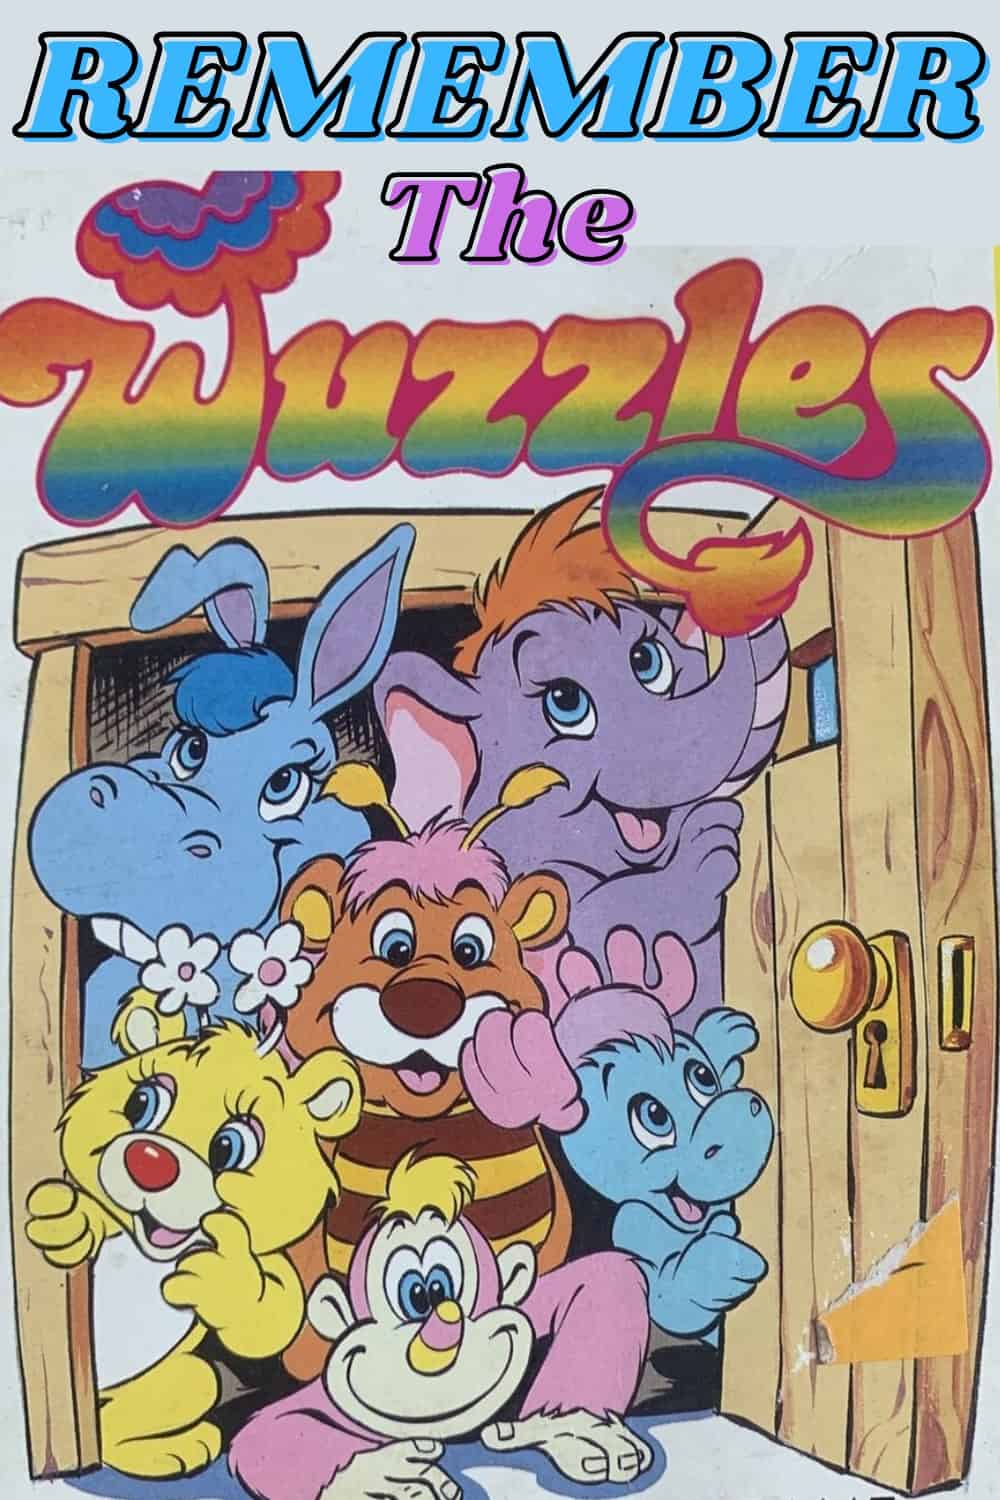 Remember The Wuzzles?